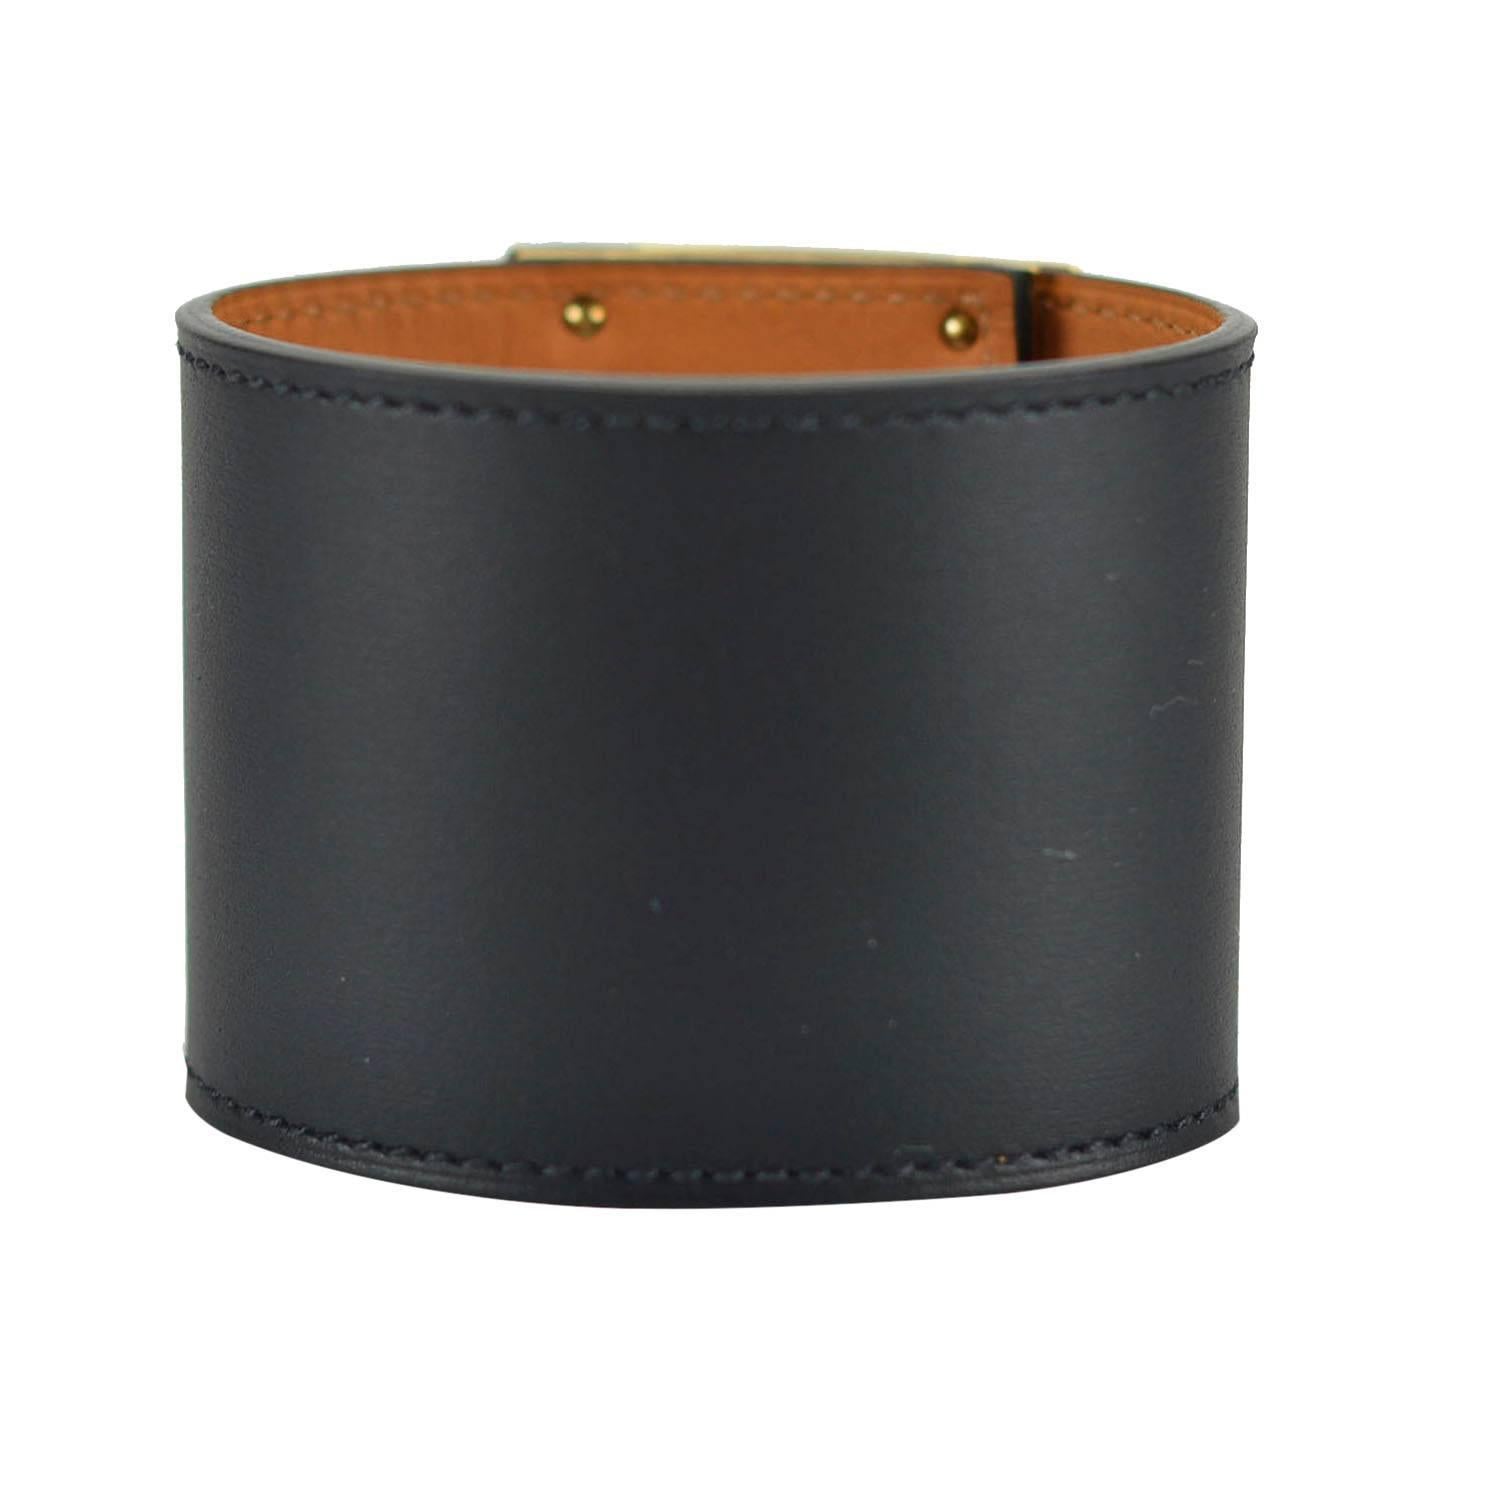 Hermes Bracelet Extreme Chamonix Leather Black Color S Size Gold Hardware 2015.

Pristine condition. Pre-owned and never used.

Bought it in Hermes store in 2015.

Size: S.

Contour 17 cm / 6.7 inches.
Diameter 5.7 cm / 2.25 inches.

Color: Noir /